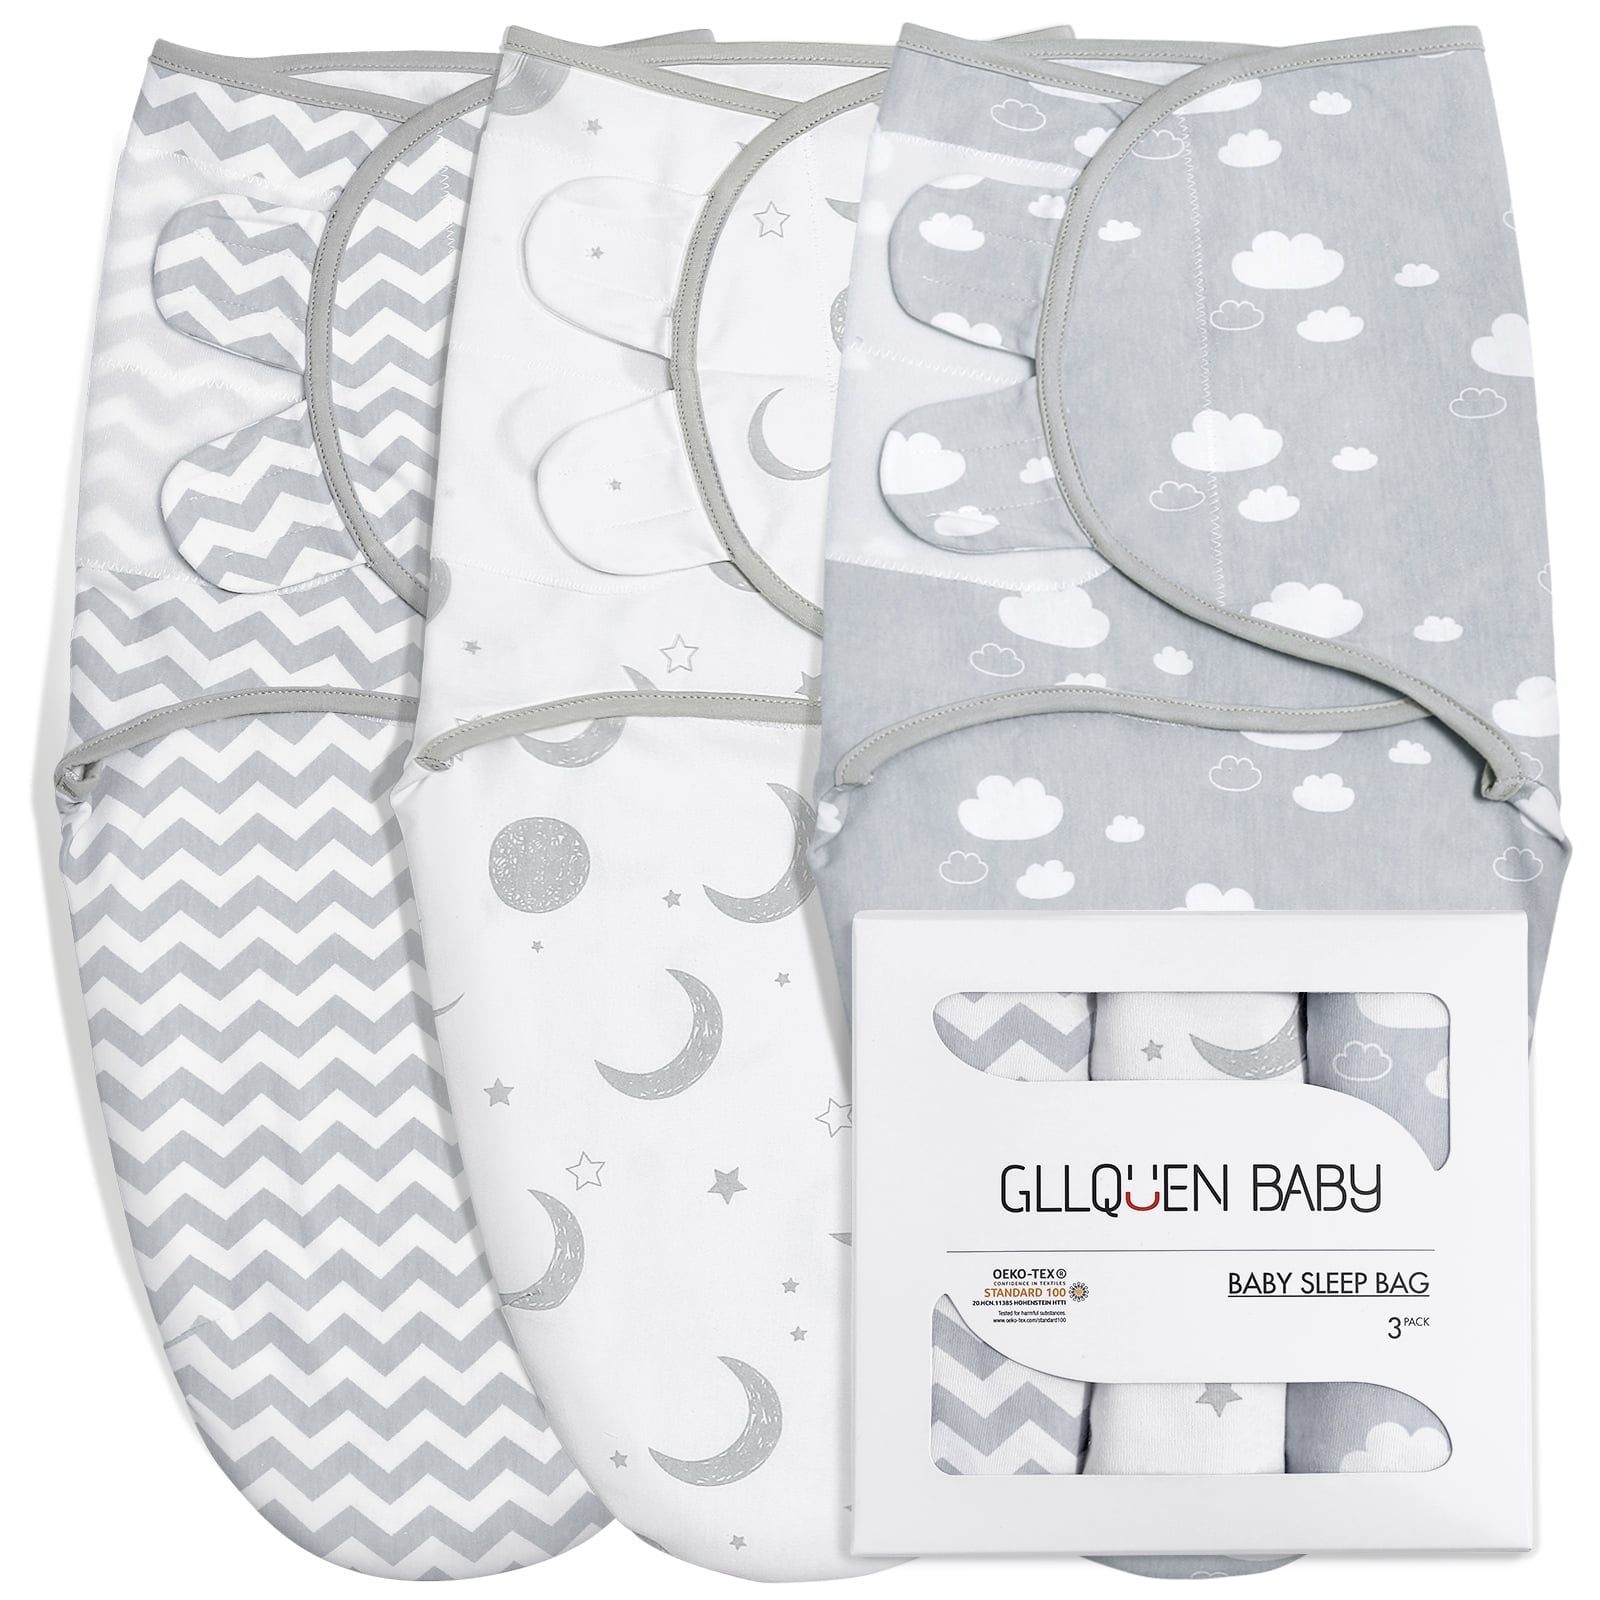 Soarwg Kids Baby Swaddle Blanket Wraps for 0-3 Months, Oeko-tex100  Certified, Adjustable Newborn Swaddle Set for Baby Boy and Girl, 100%  Breathable Organic Cotton Fabric Baby Essentials, 2 Pack (Grey) :  